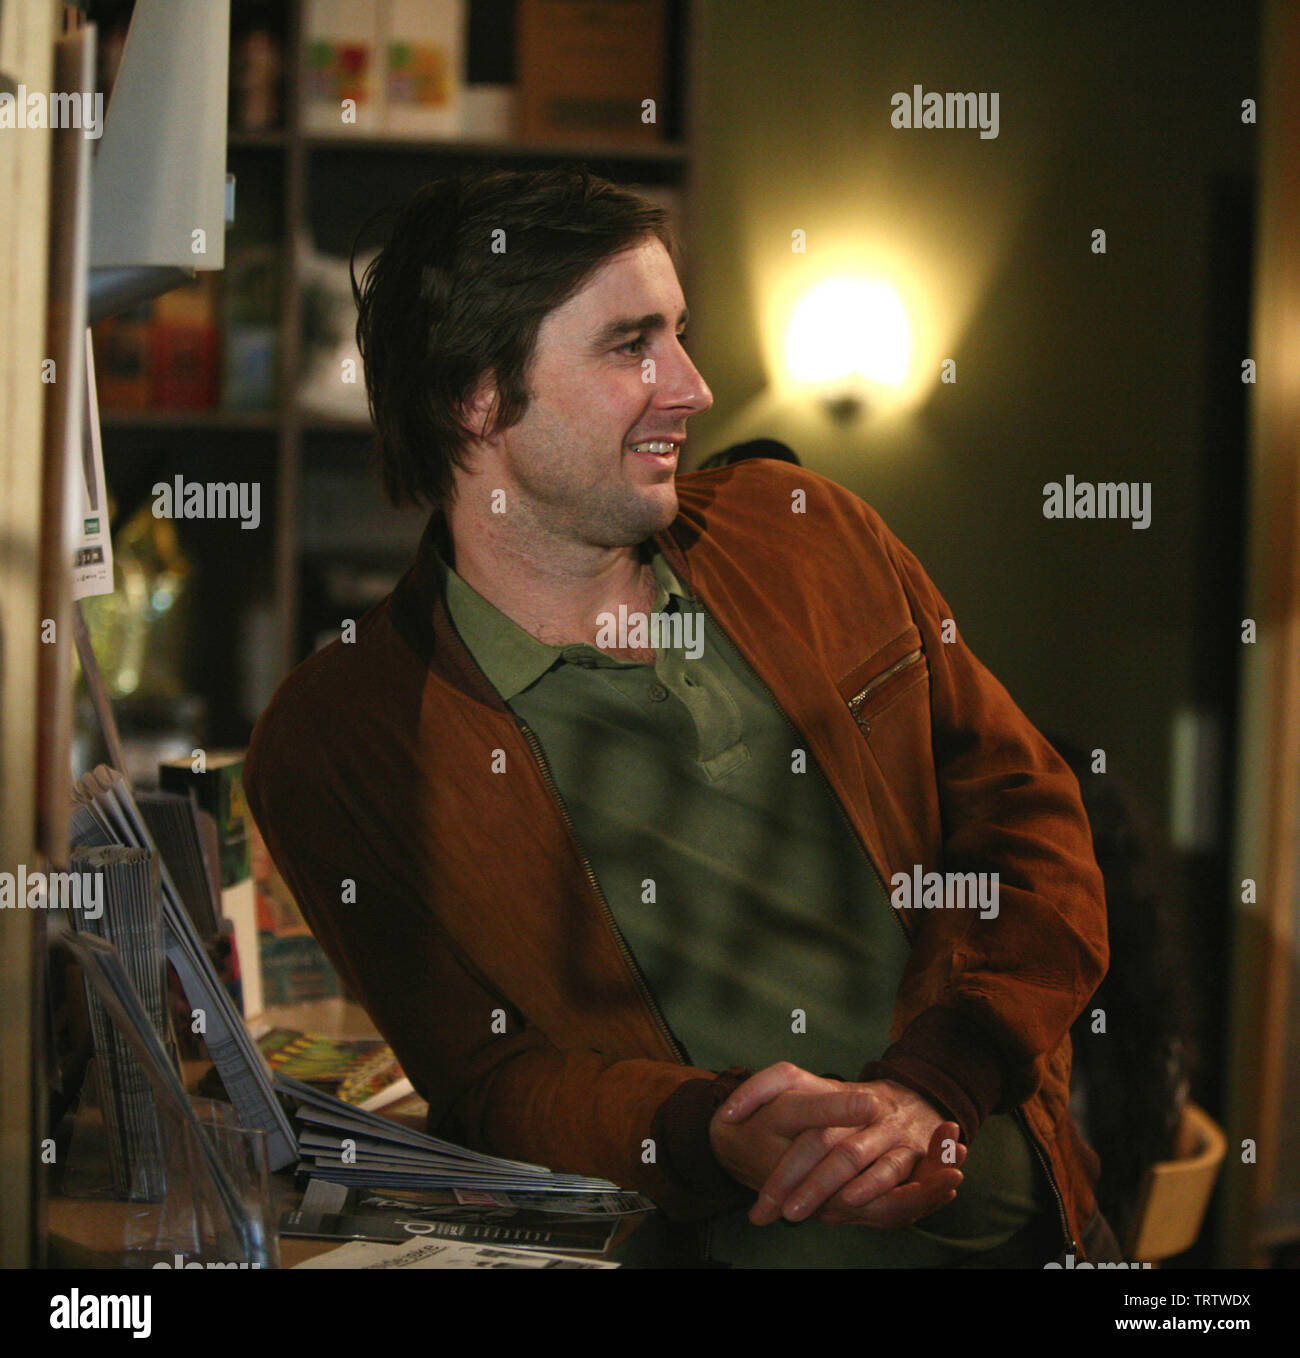 LUKE WILSON in YOU KILL ME (2007). Copyright: Editorial use only. No merchandising or book covers. This is a publicly distributed handout. Access rights only, no license of copyright provided. Only to be reproduced in conjunction with promotion of this film. Credit: BIPOLAR PICTURES/CAROL BAUM PRODUCTIONS/CODE ENTERTAINMENT/ / Album Stock Photo